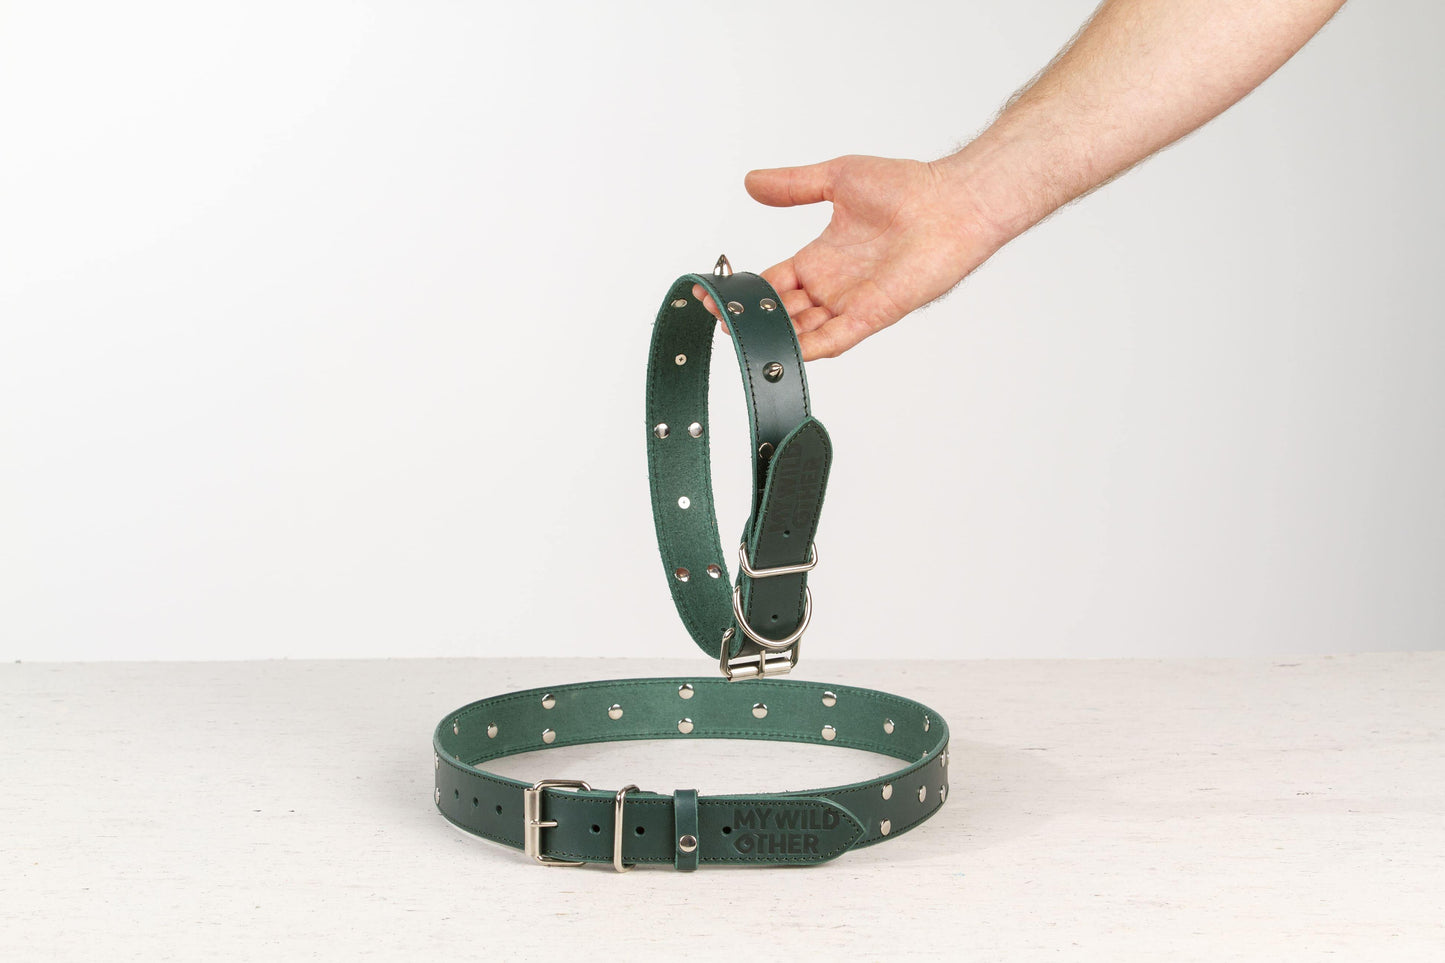 Handmade green leather STUDDED dog collar - premium dog goods handmade in Europe by My Wild Other